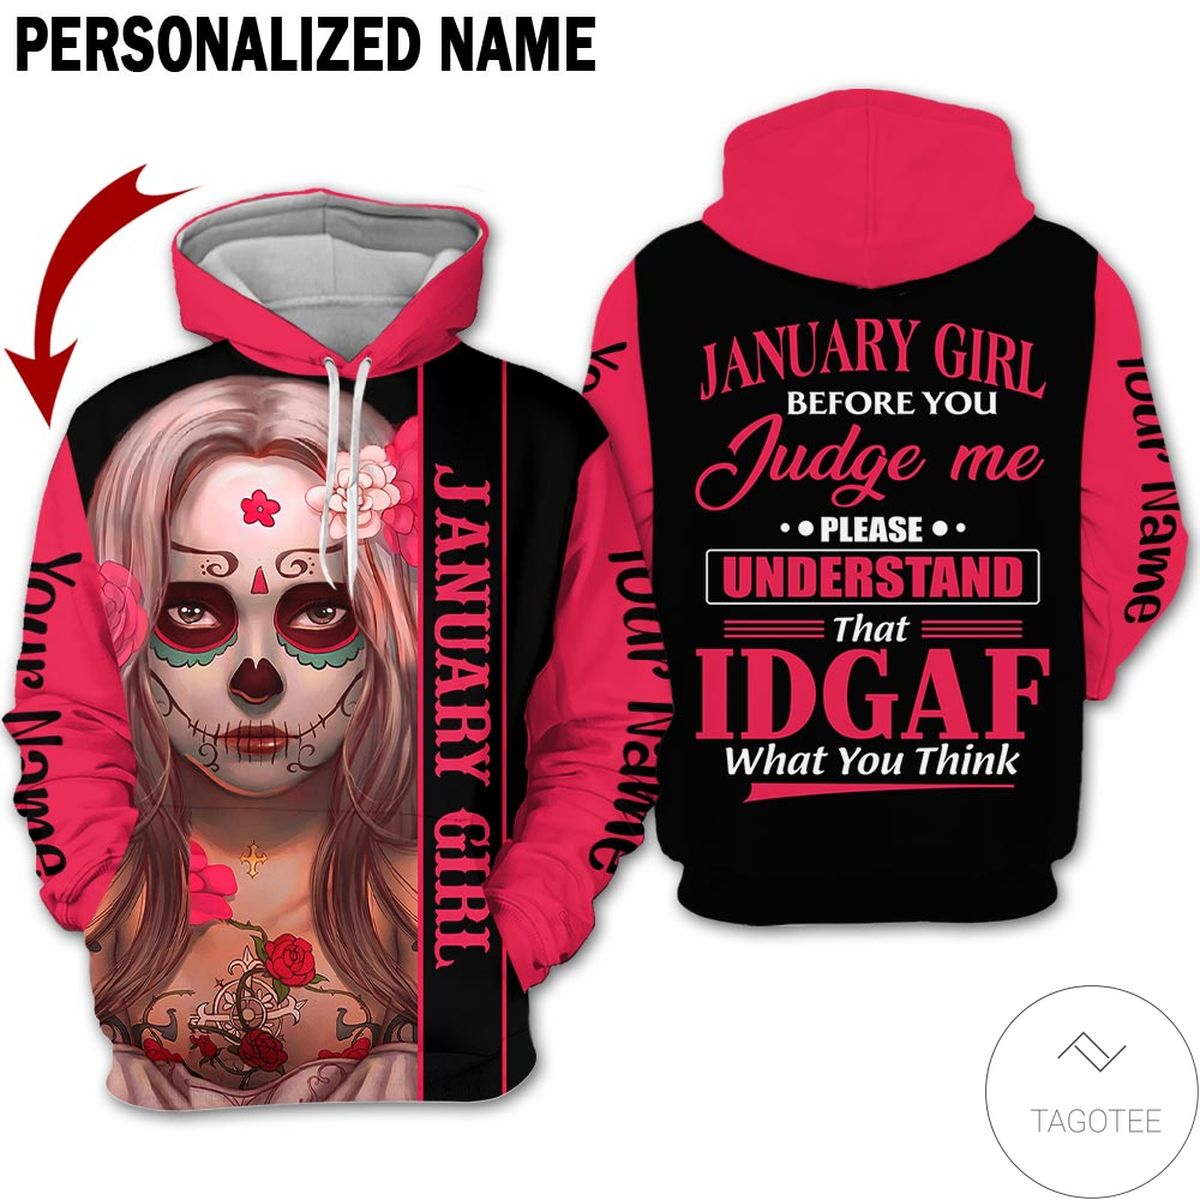 Personalized Name January Girl Before Judge Me Idgaf What You Think 3d Hoodie